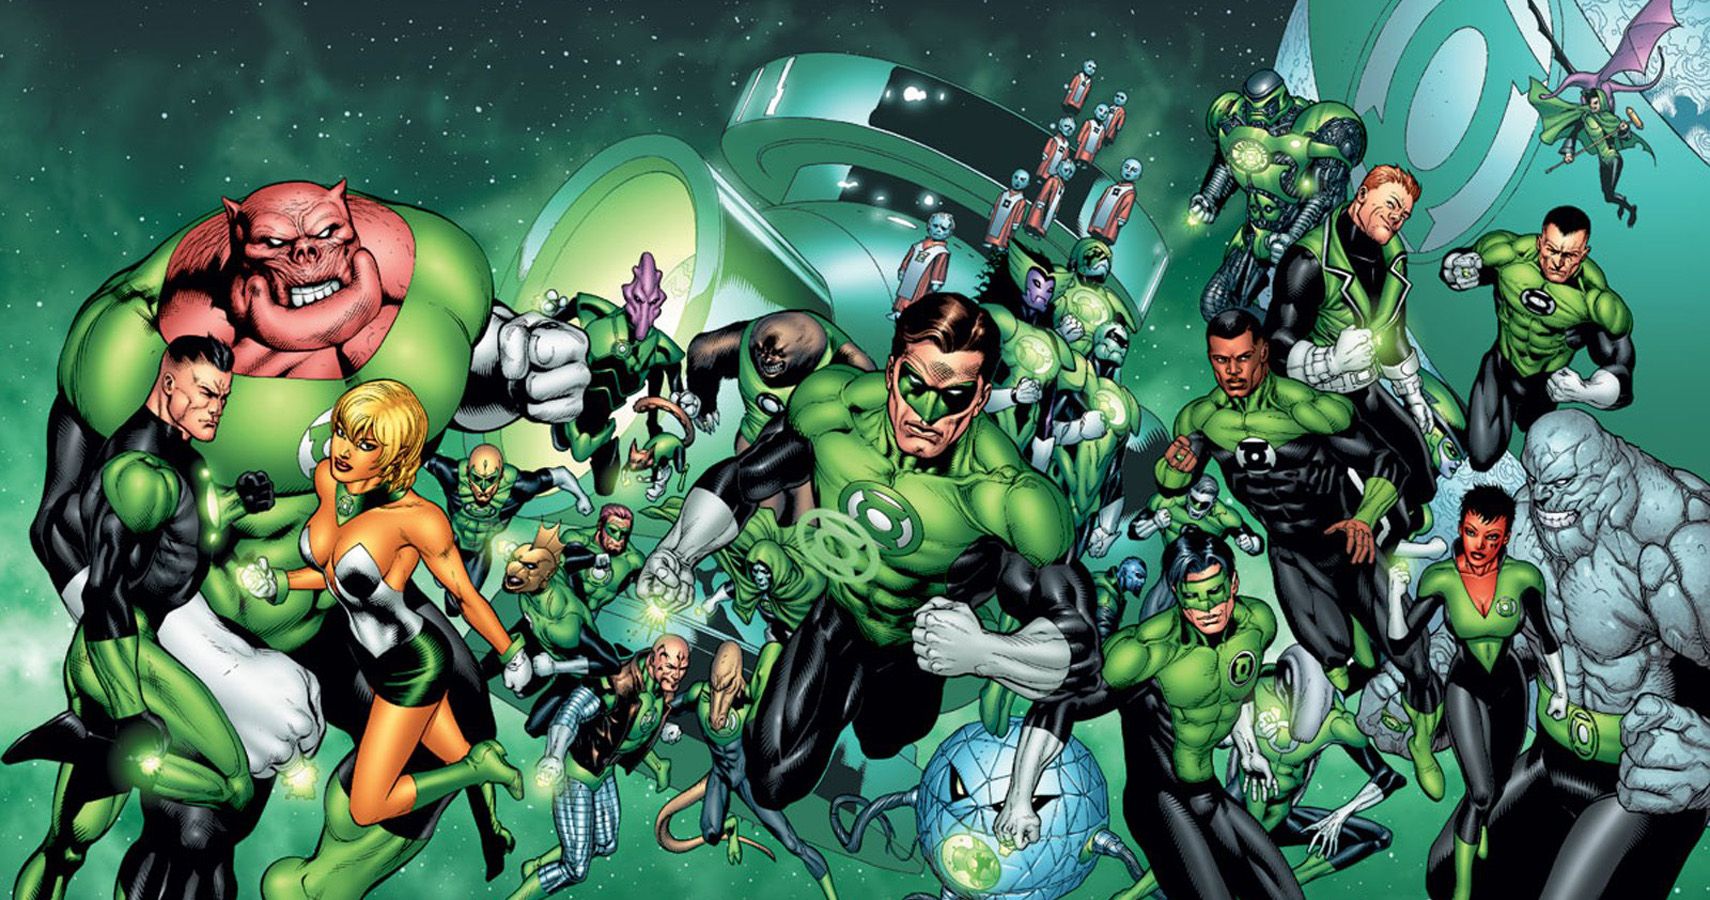 A group shot of the most famous members of the Green Lantern Corps, including Hal Jordan, John Stewart, Kilowog, and Mogo